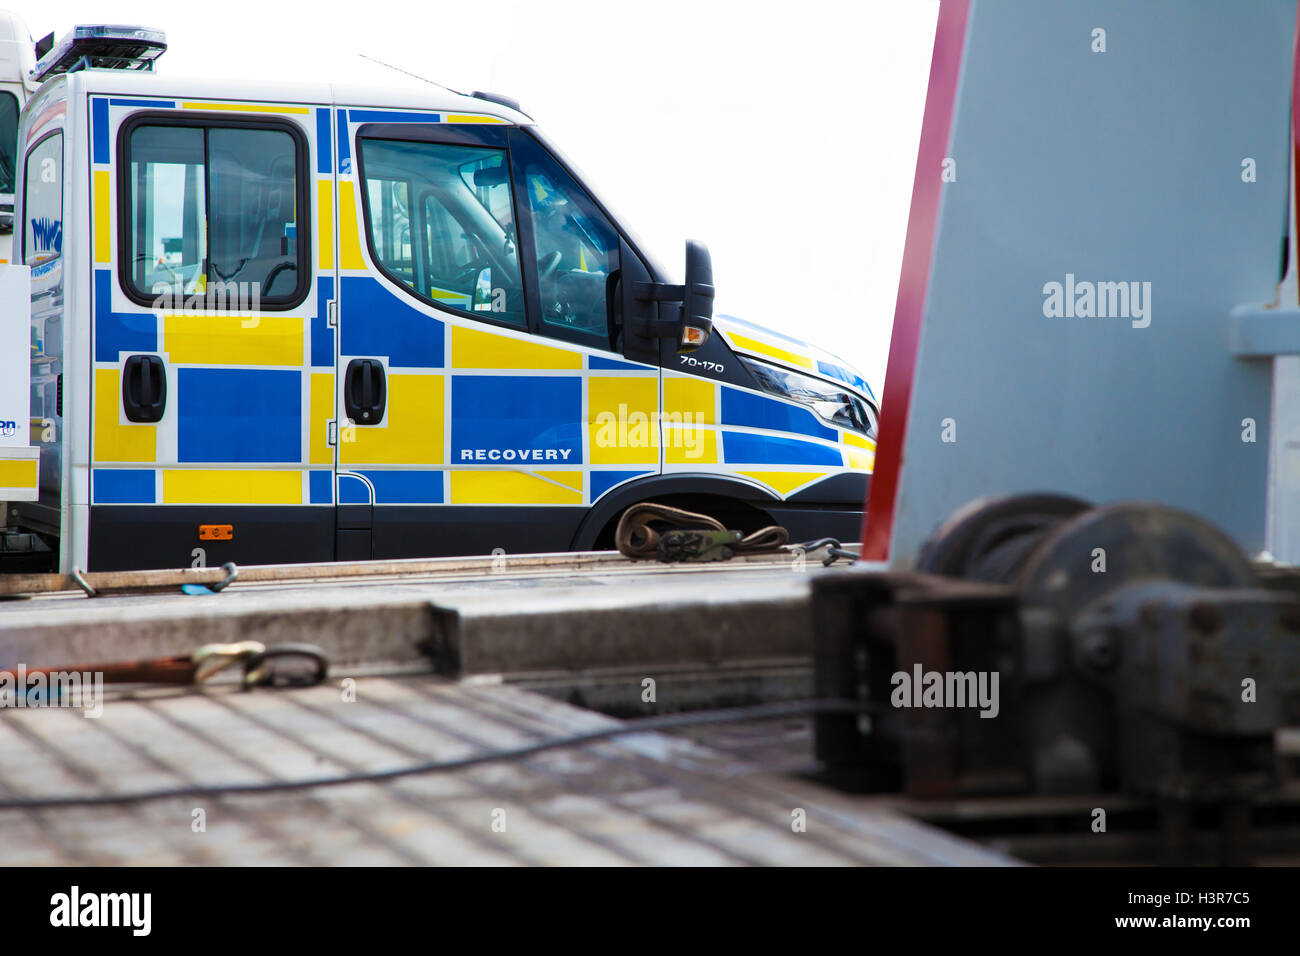 Recovery Truck,UK.The breakdown truck here is marked up in blue and yellow battenburg markings livery.Isolated on white Stock Photo